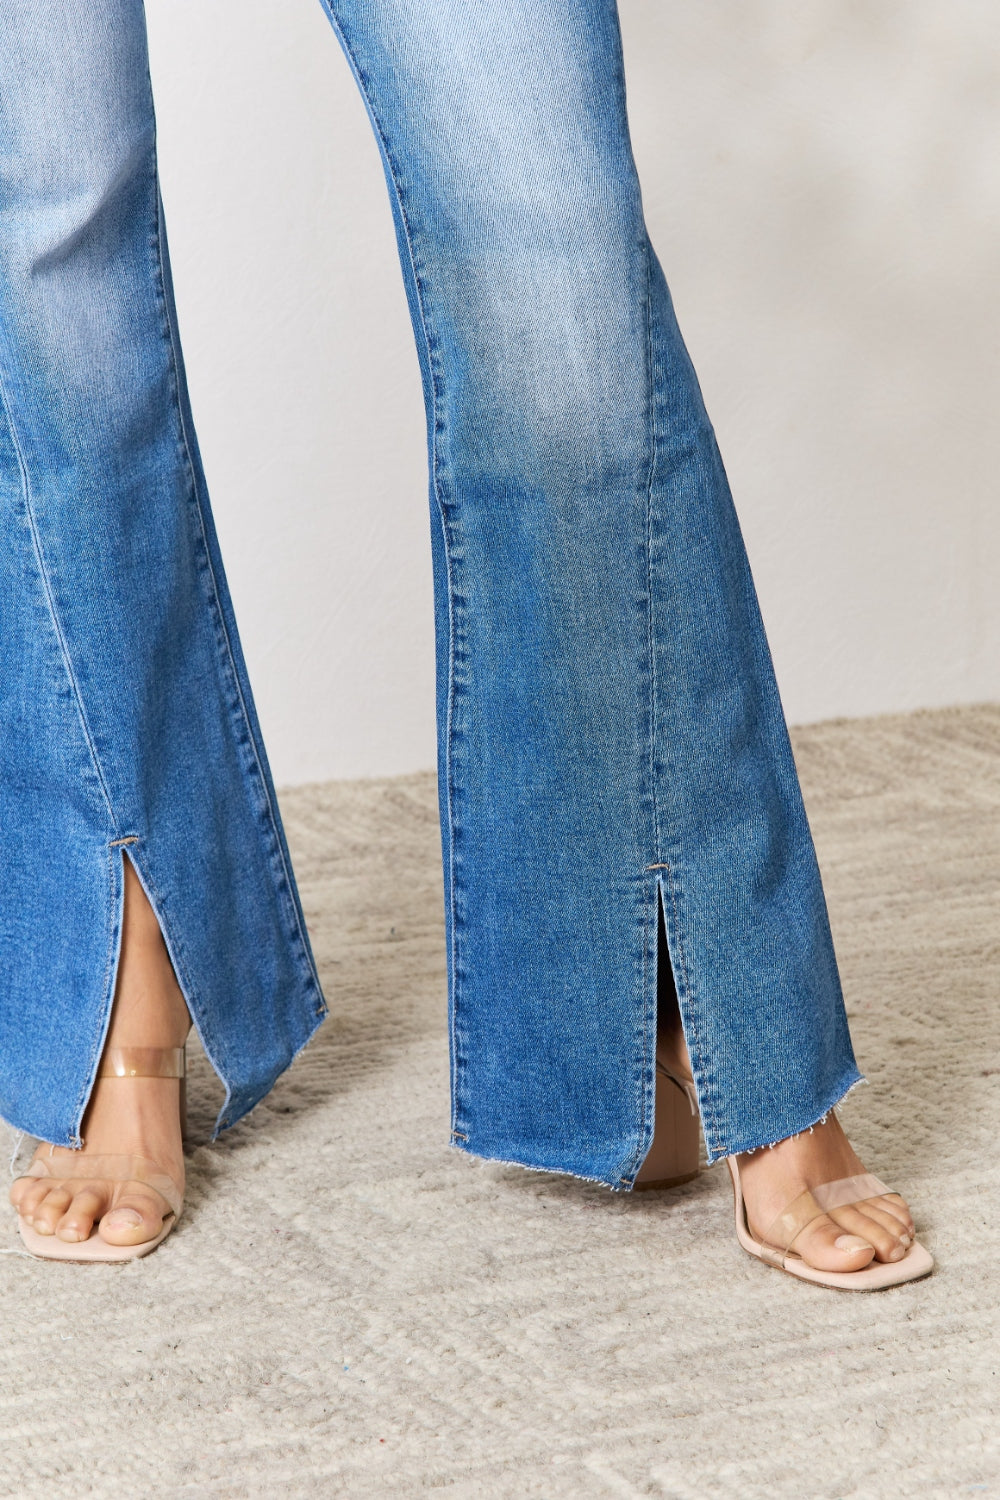 BAYEAS Front Slits Detail Zipper Fly Flare Jeans